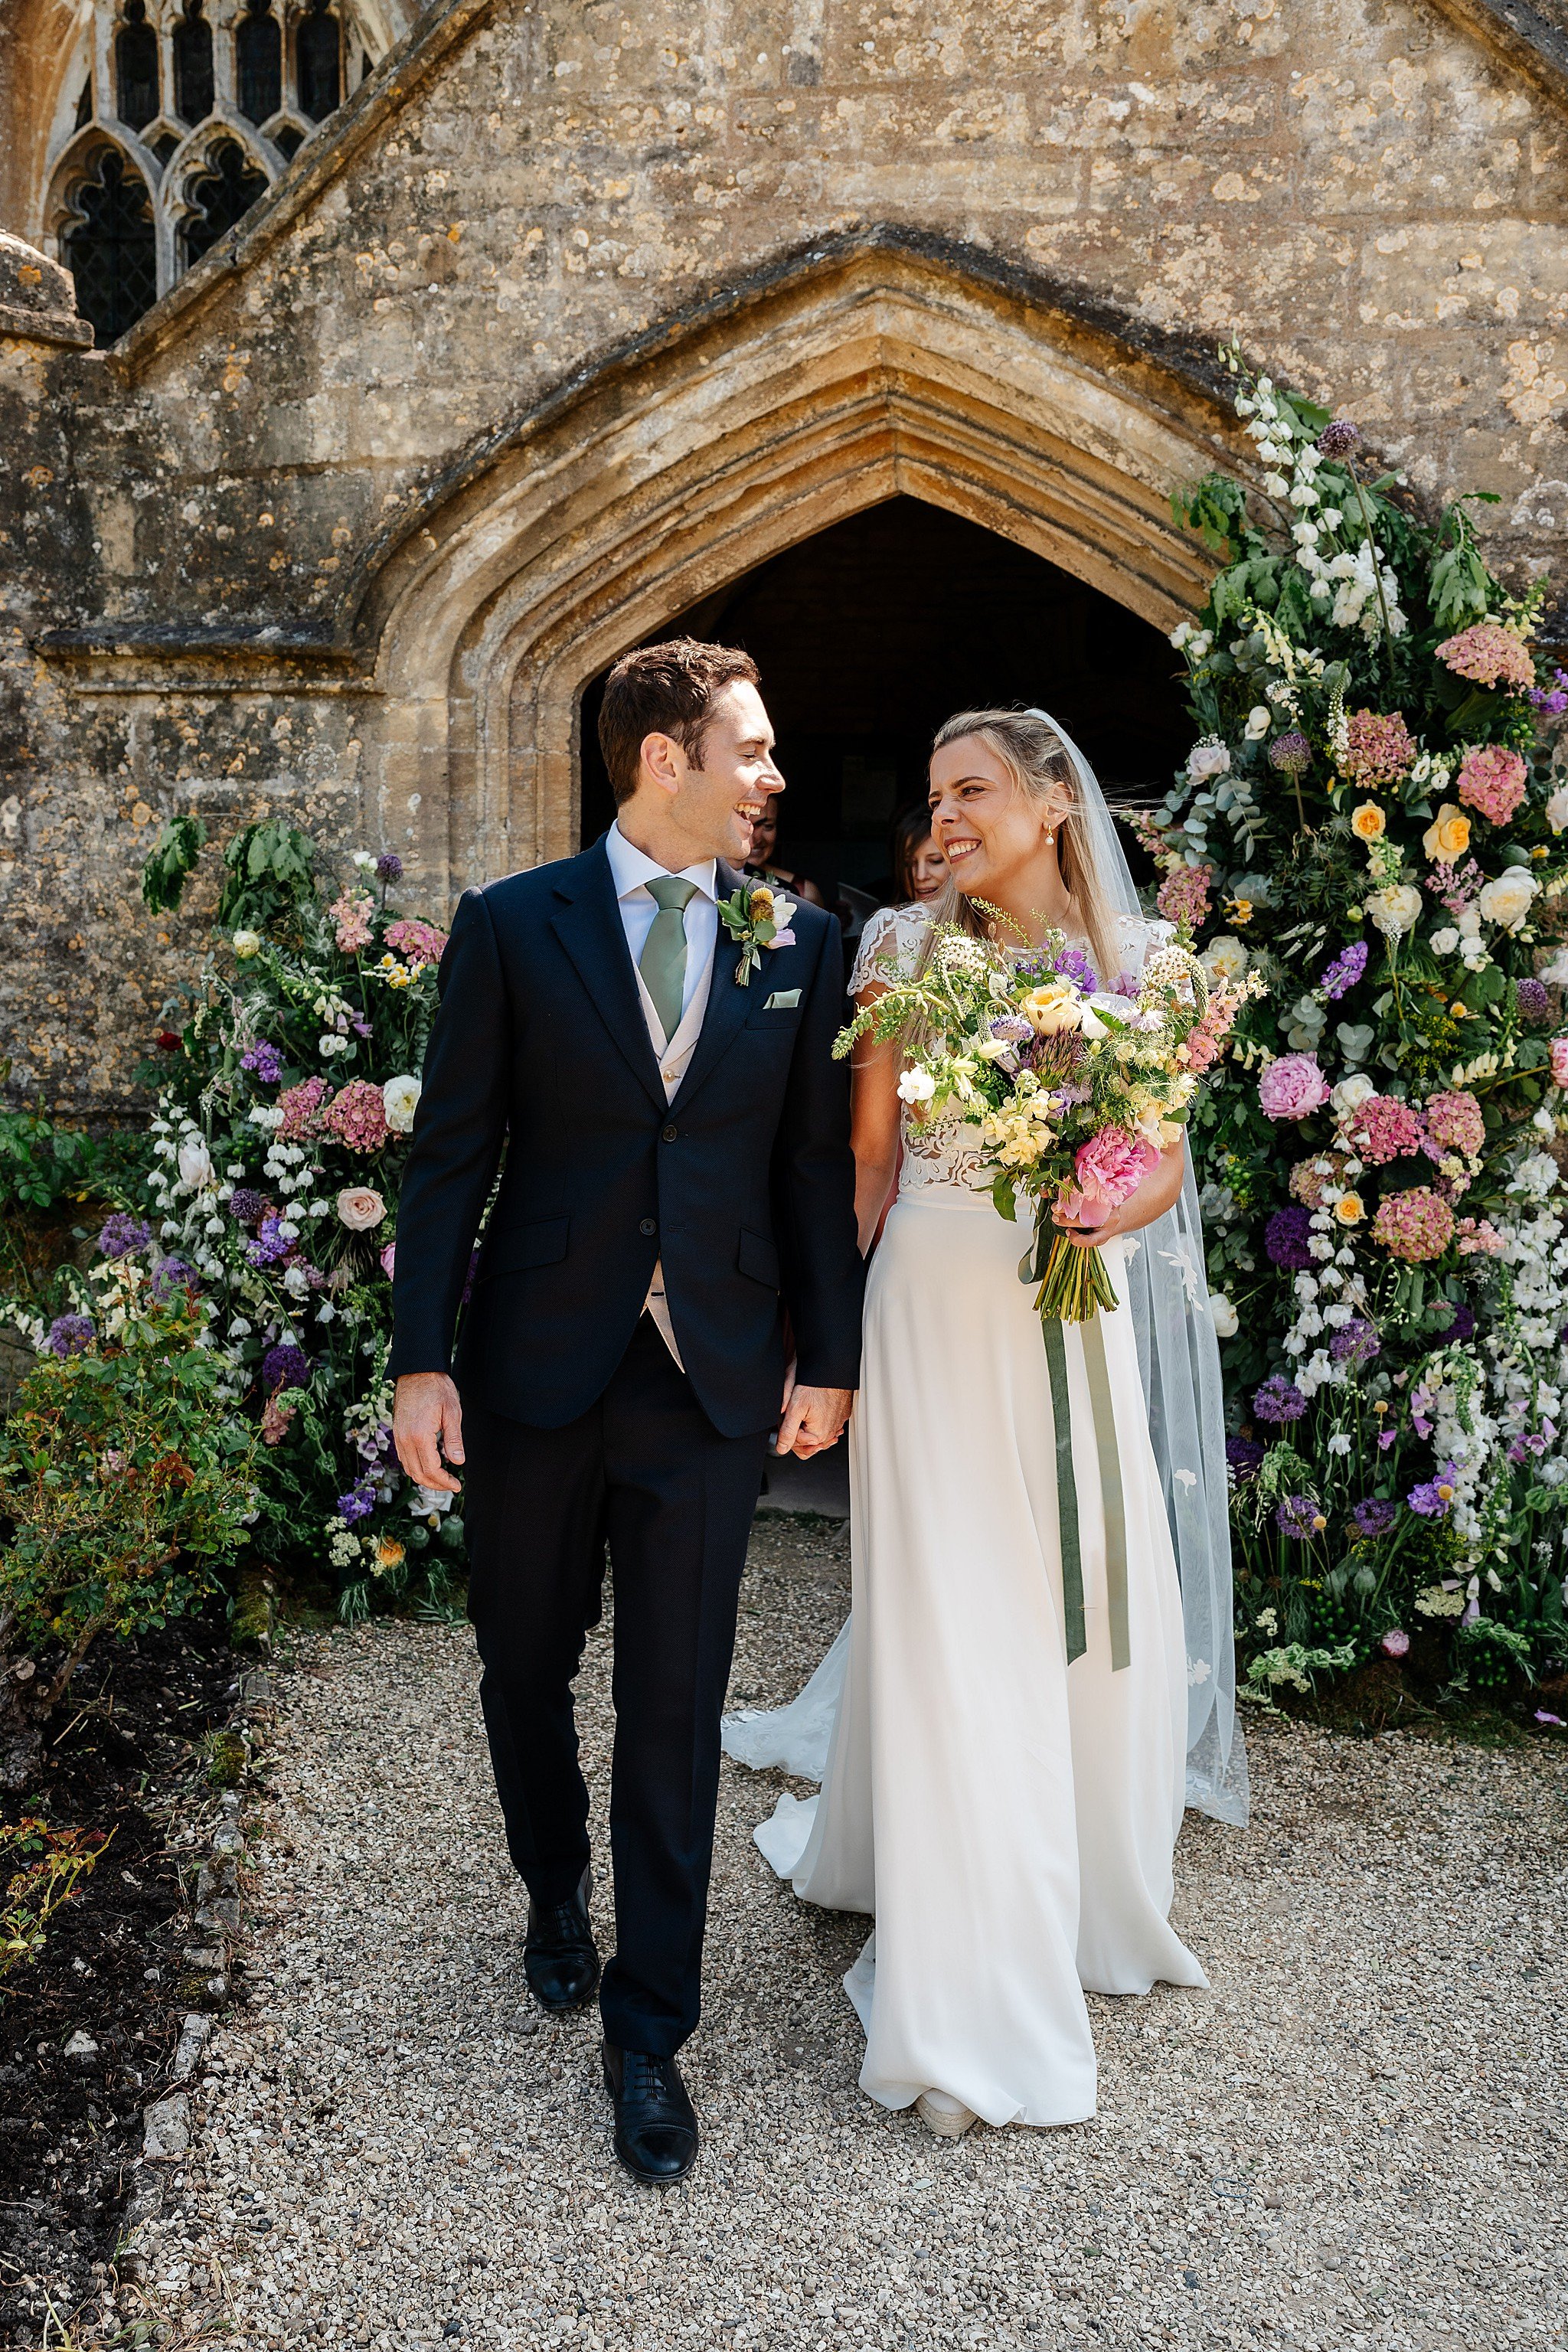 Cotswolds wedding photography at Leys Farm, Swerford.